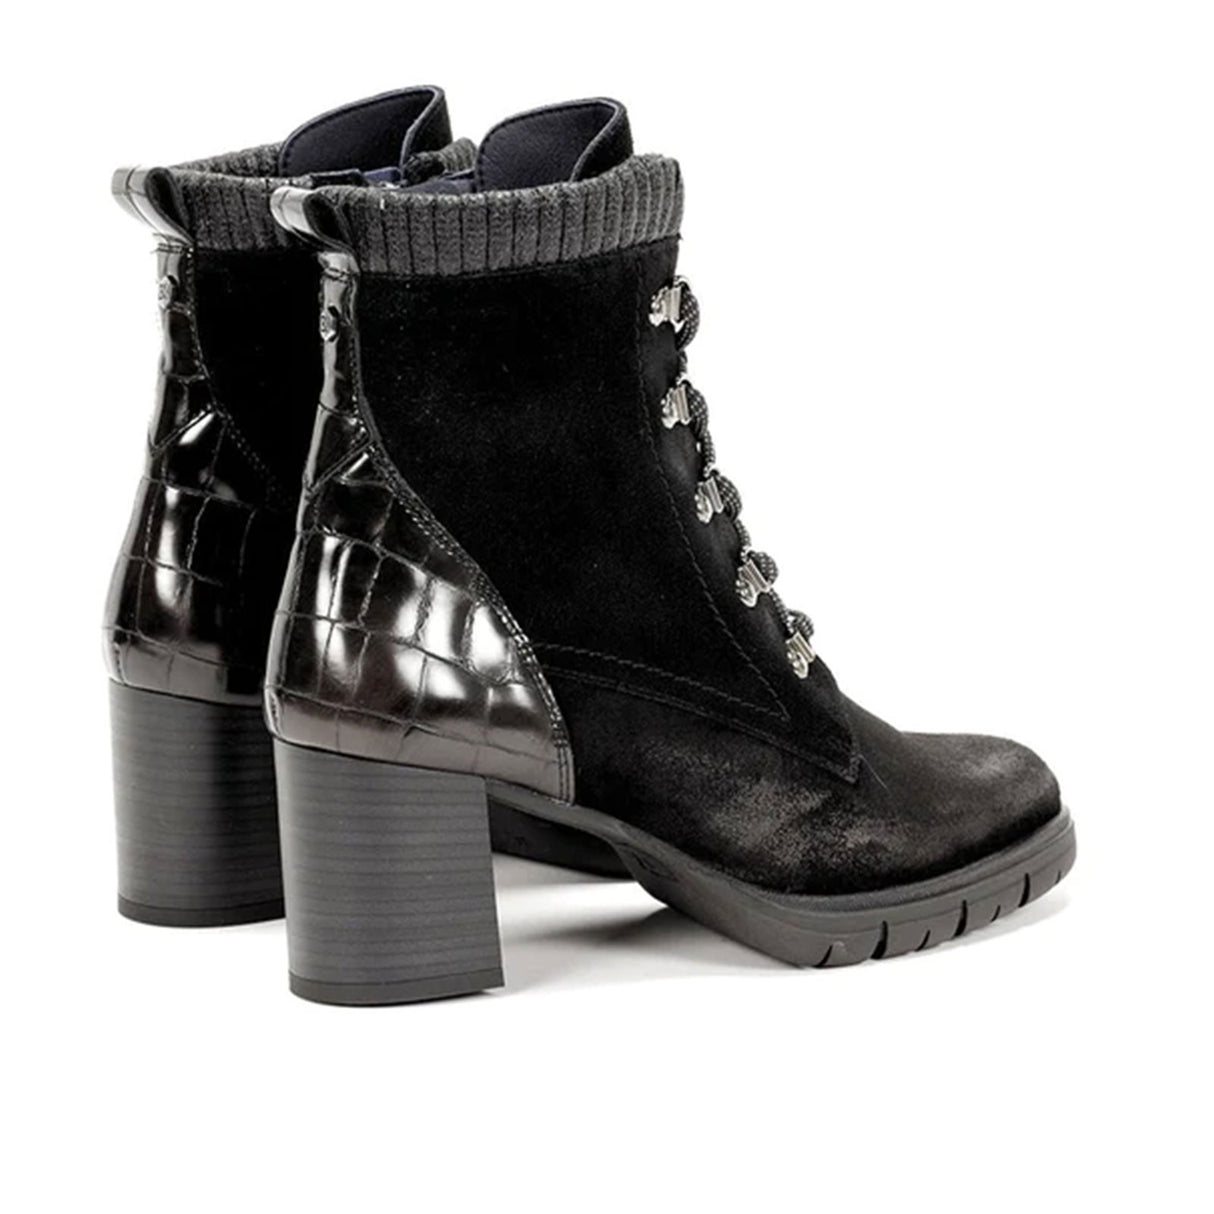 Dorking Camyl D8847 Ankle Boot (Women) - Black Boots - Fashion - Ankle Boot - The Heel Shoe Fitters